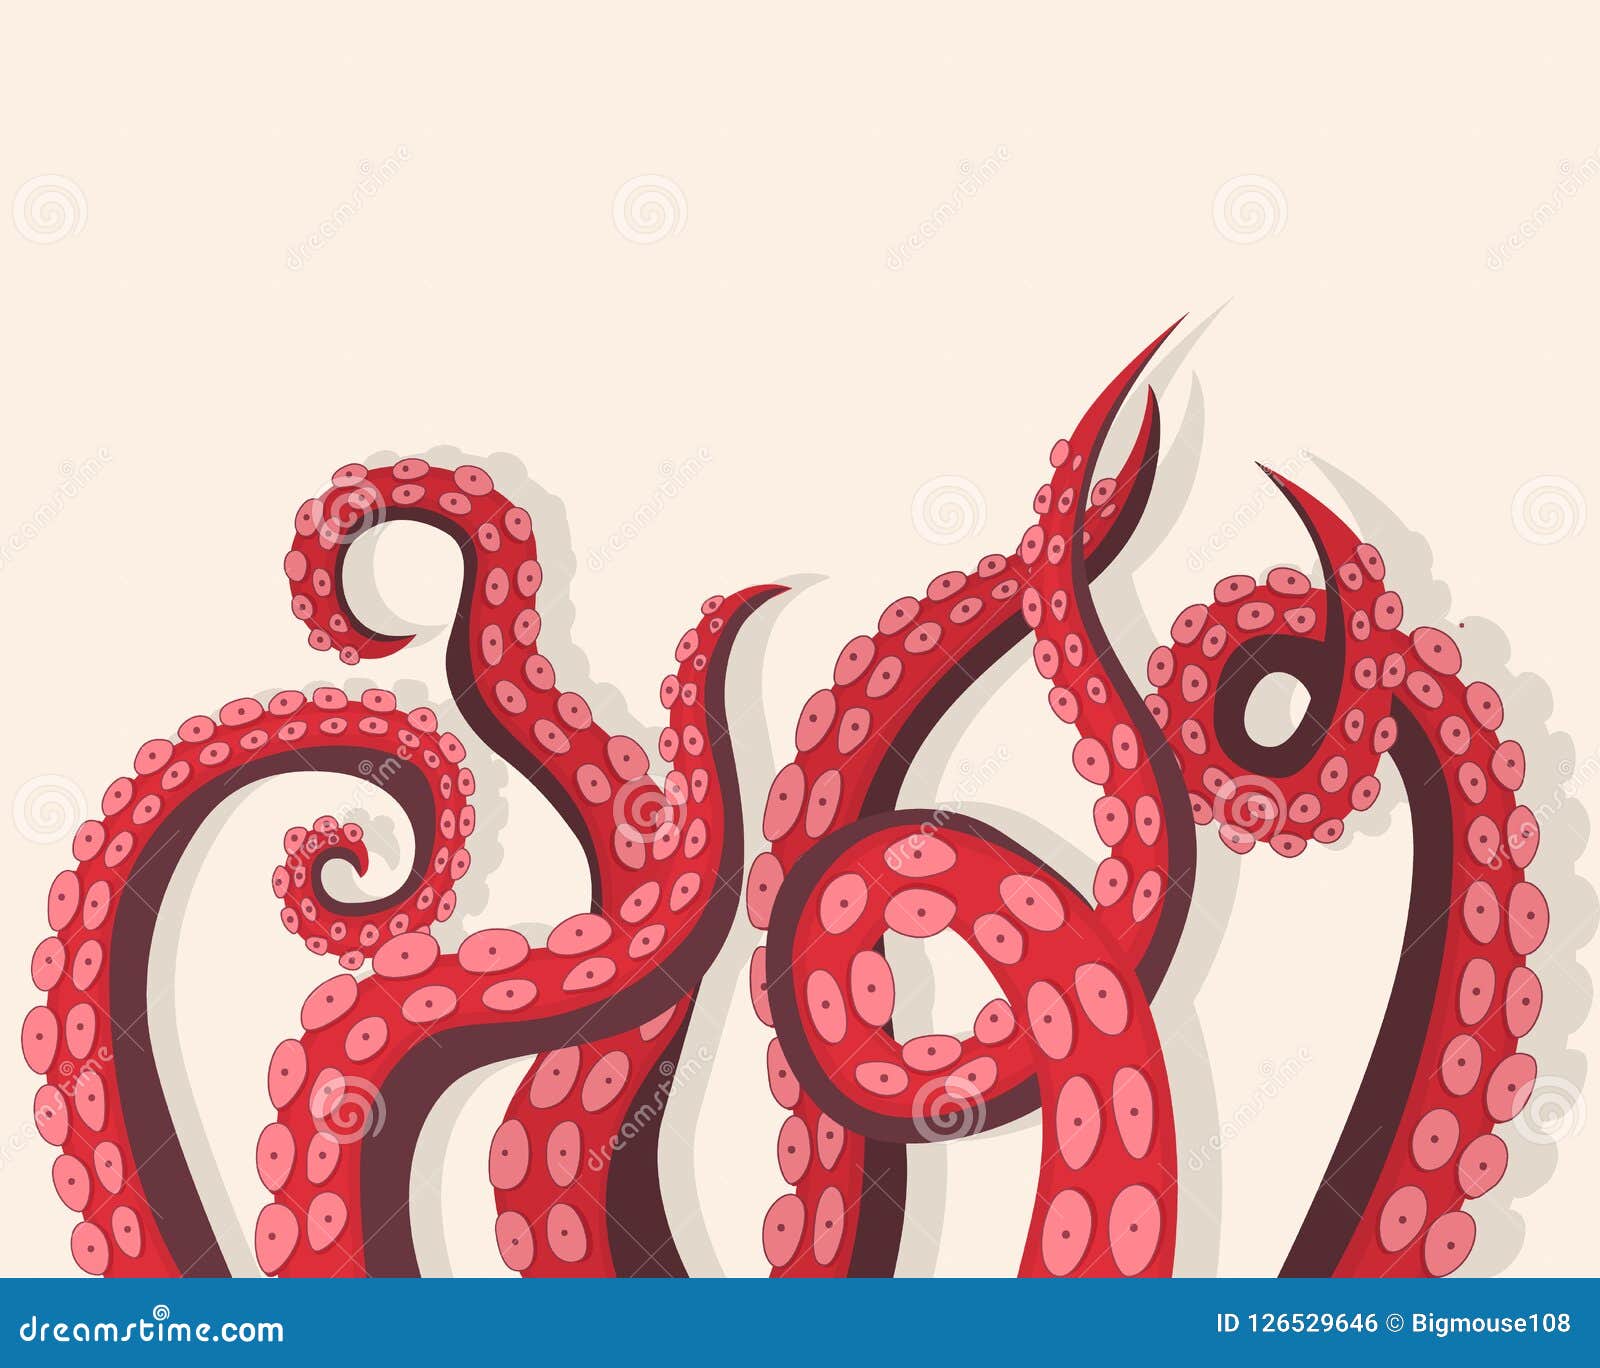 Card Octopus Tentacle Stock Illustrations – 501 Card Octopus